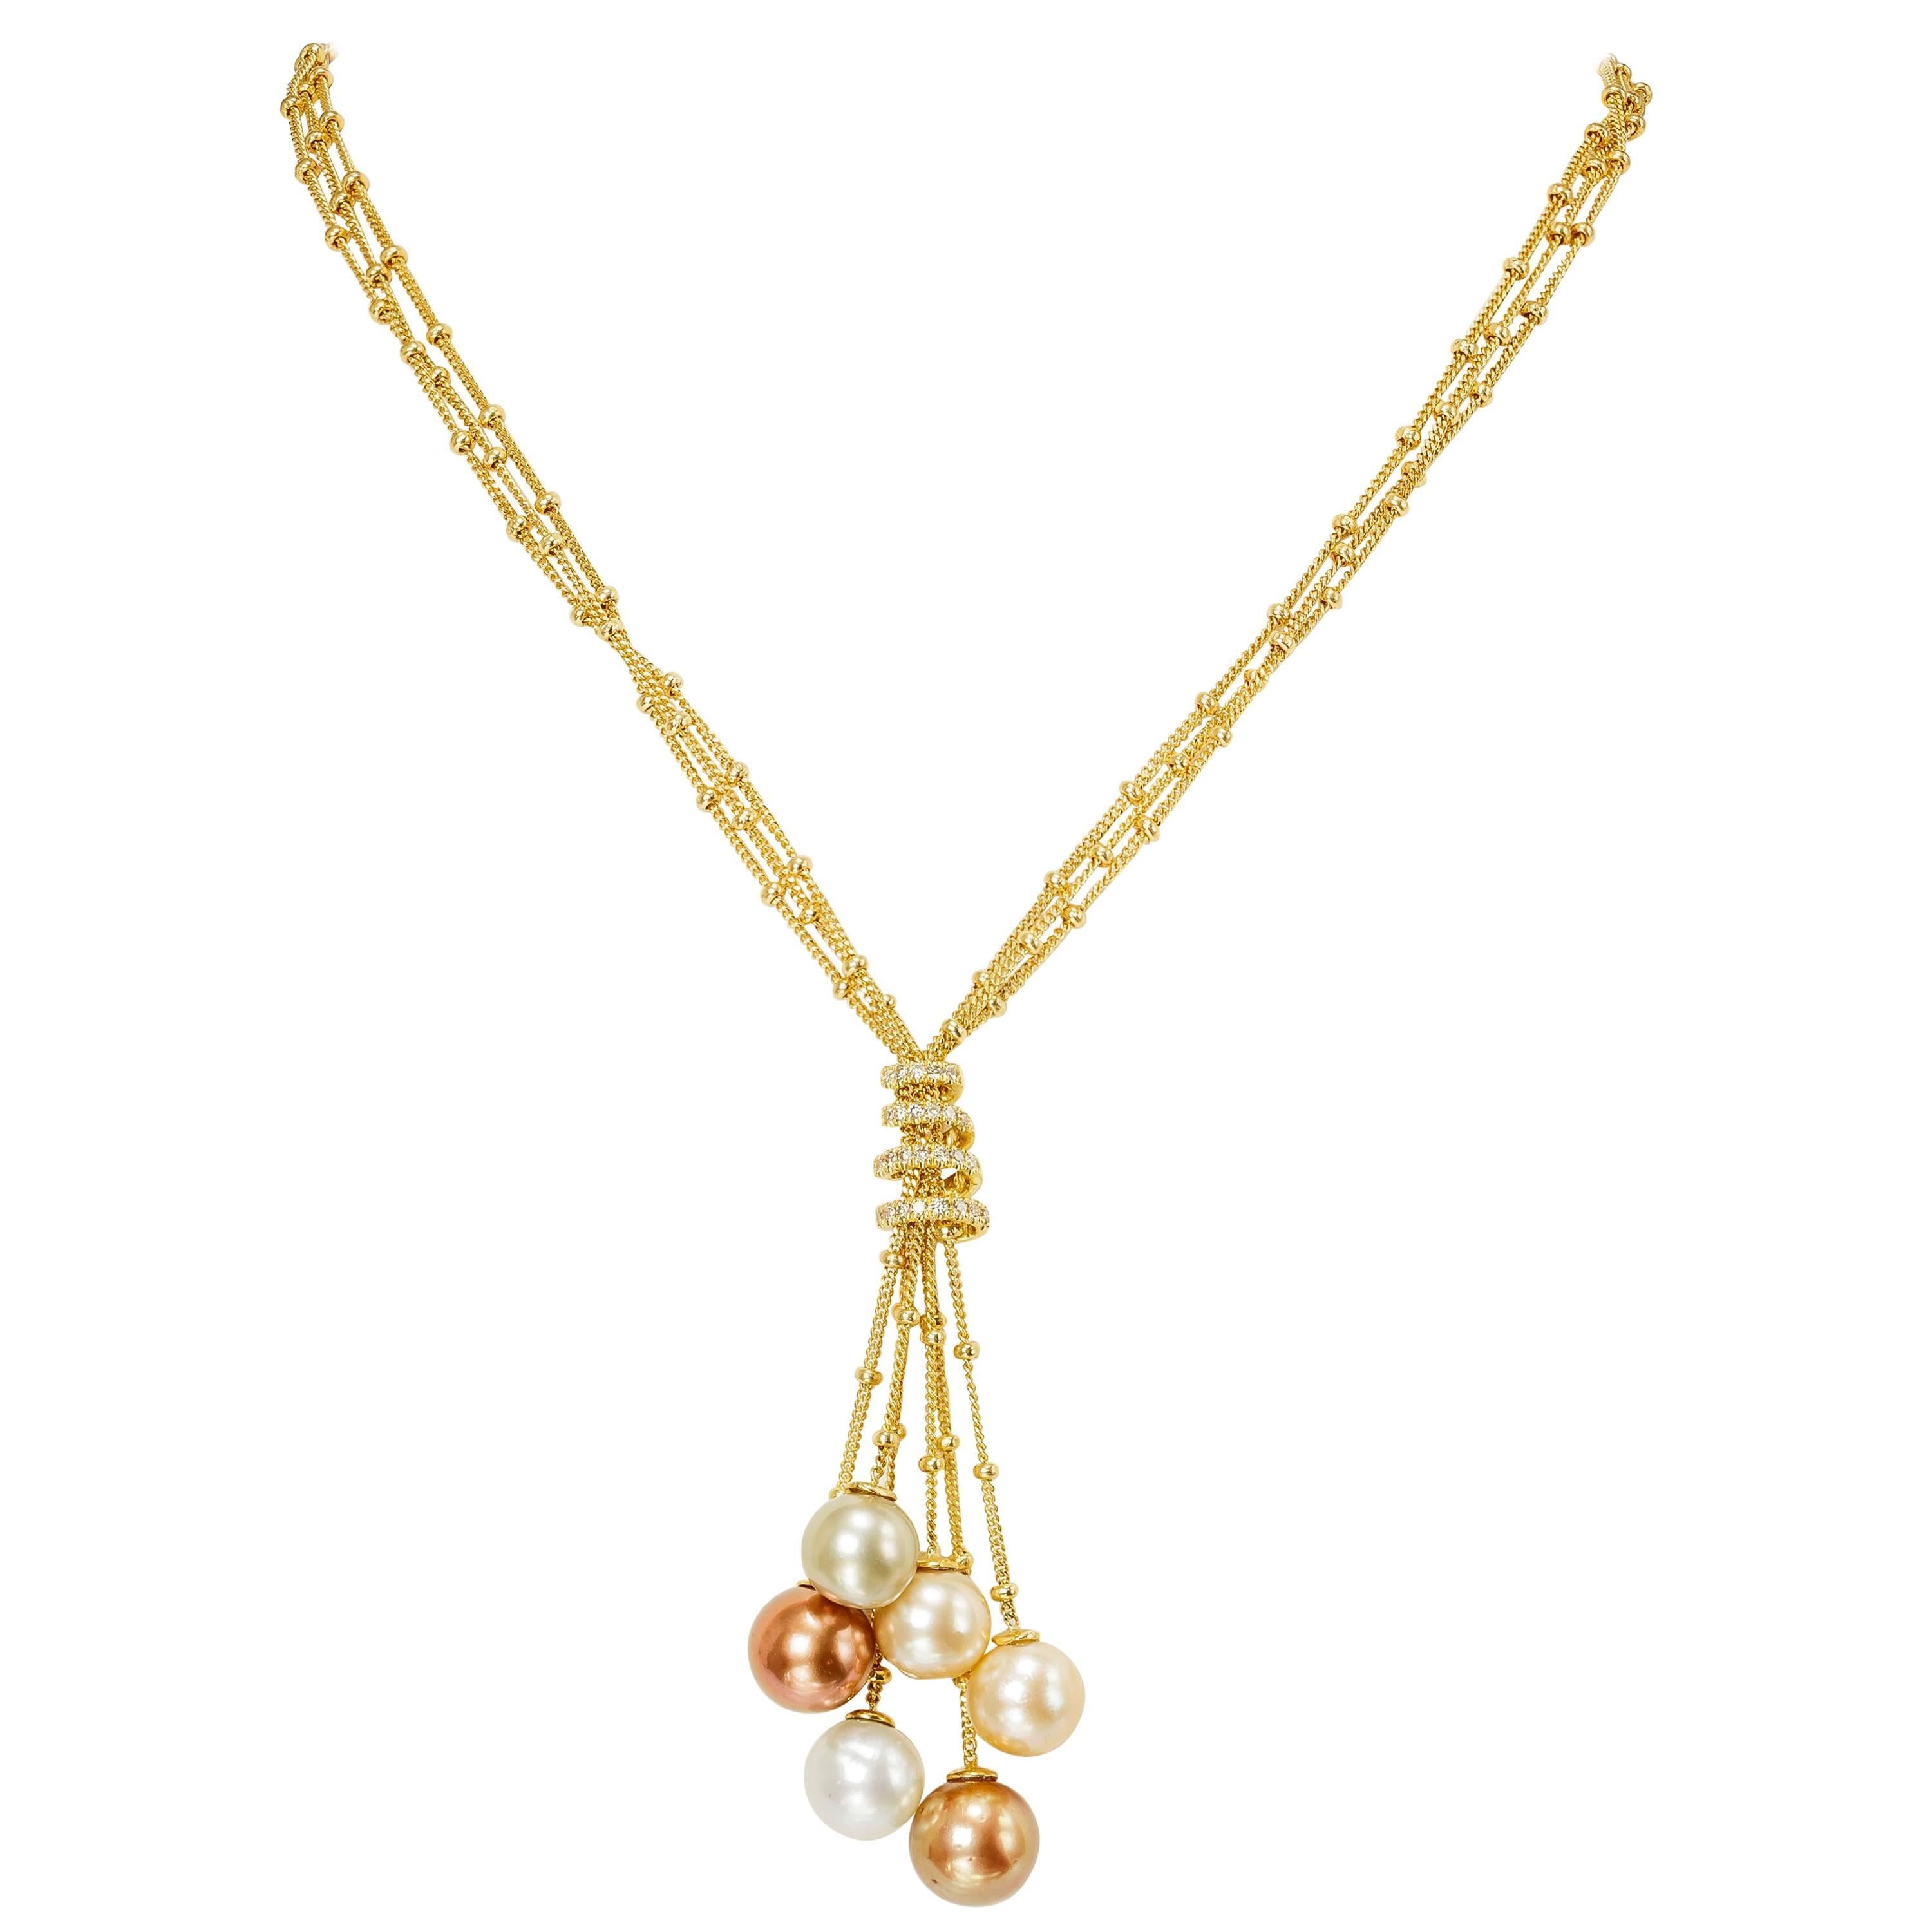 Yvel Multicolored South Sea Pearl Necklace 3 Strand 18K Yellow Gold and Diamonds For Sale